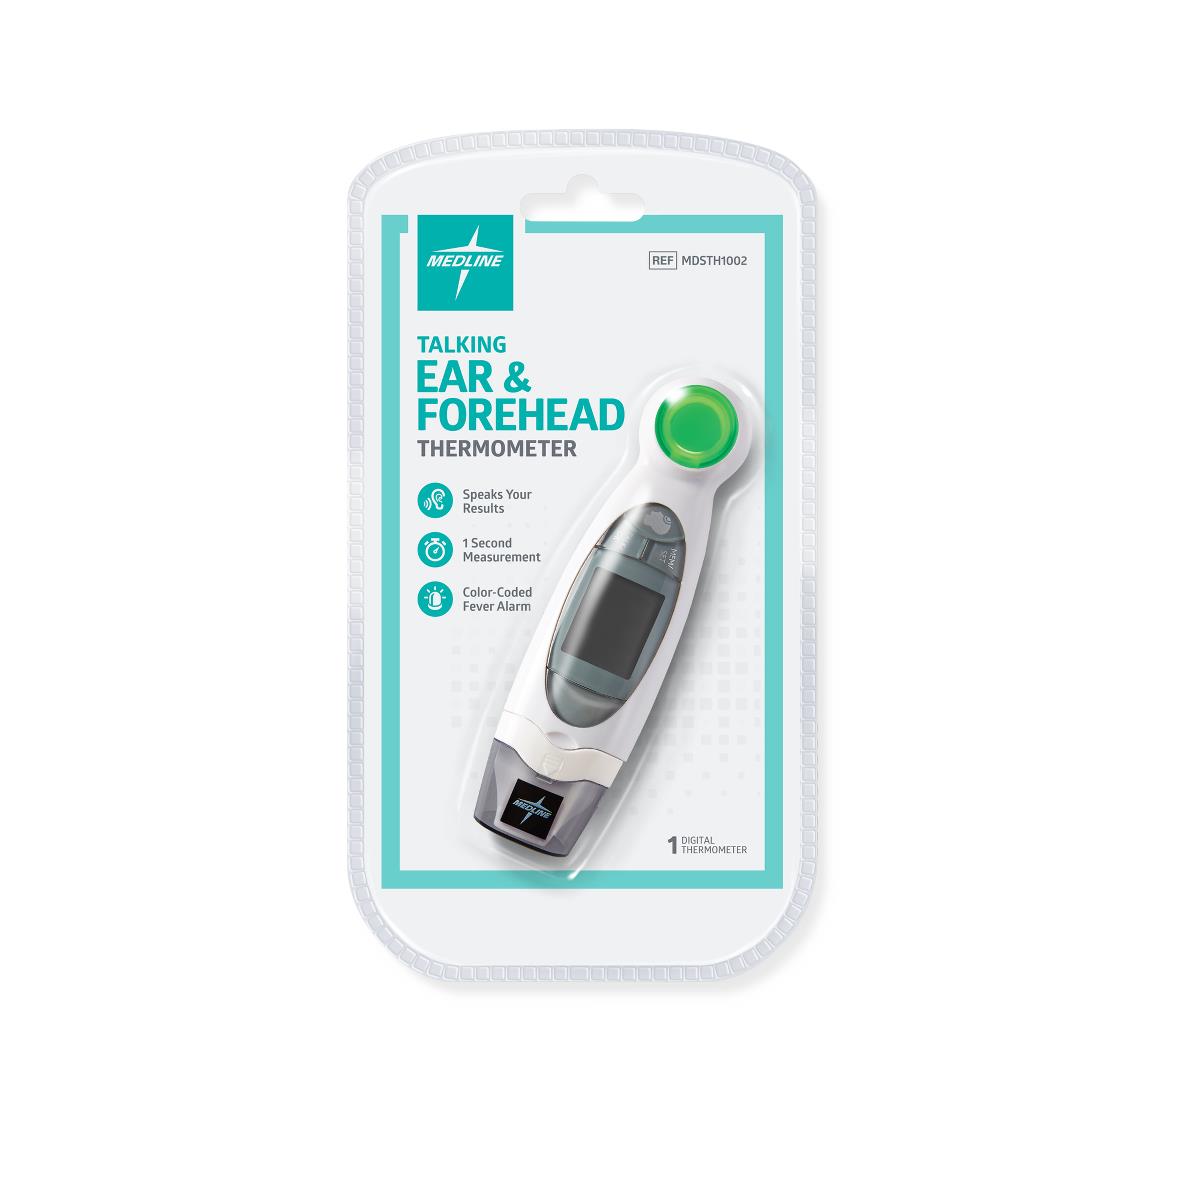 Medline Talking Ear and Forehead Thermometer for Home, MDSTH1002